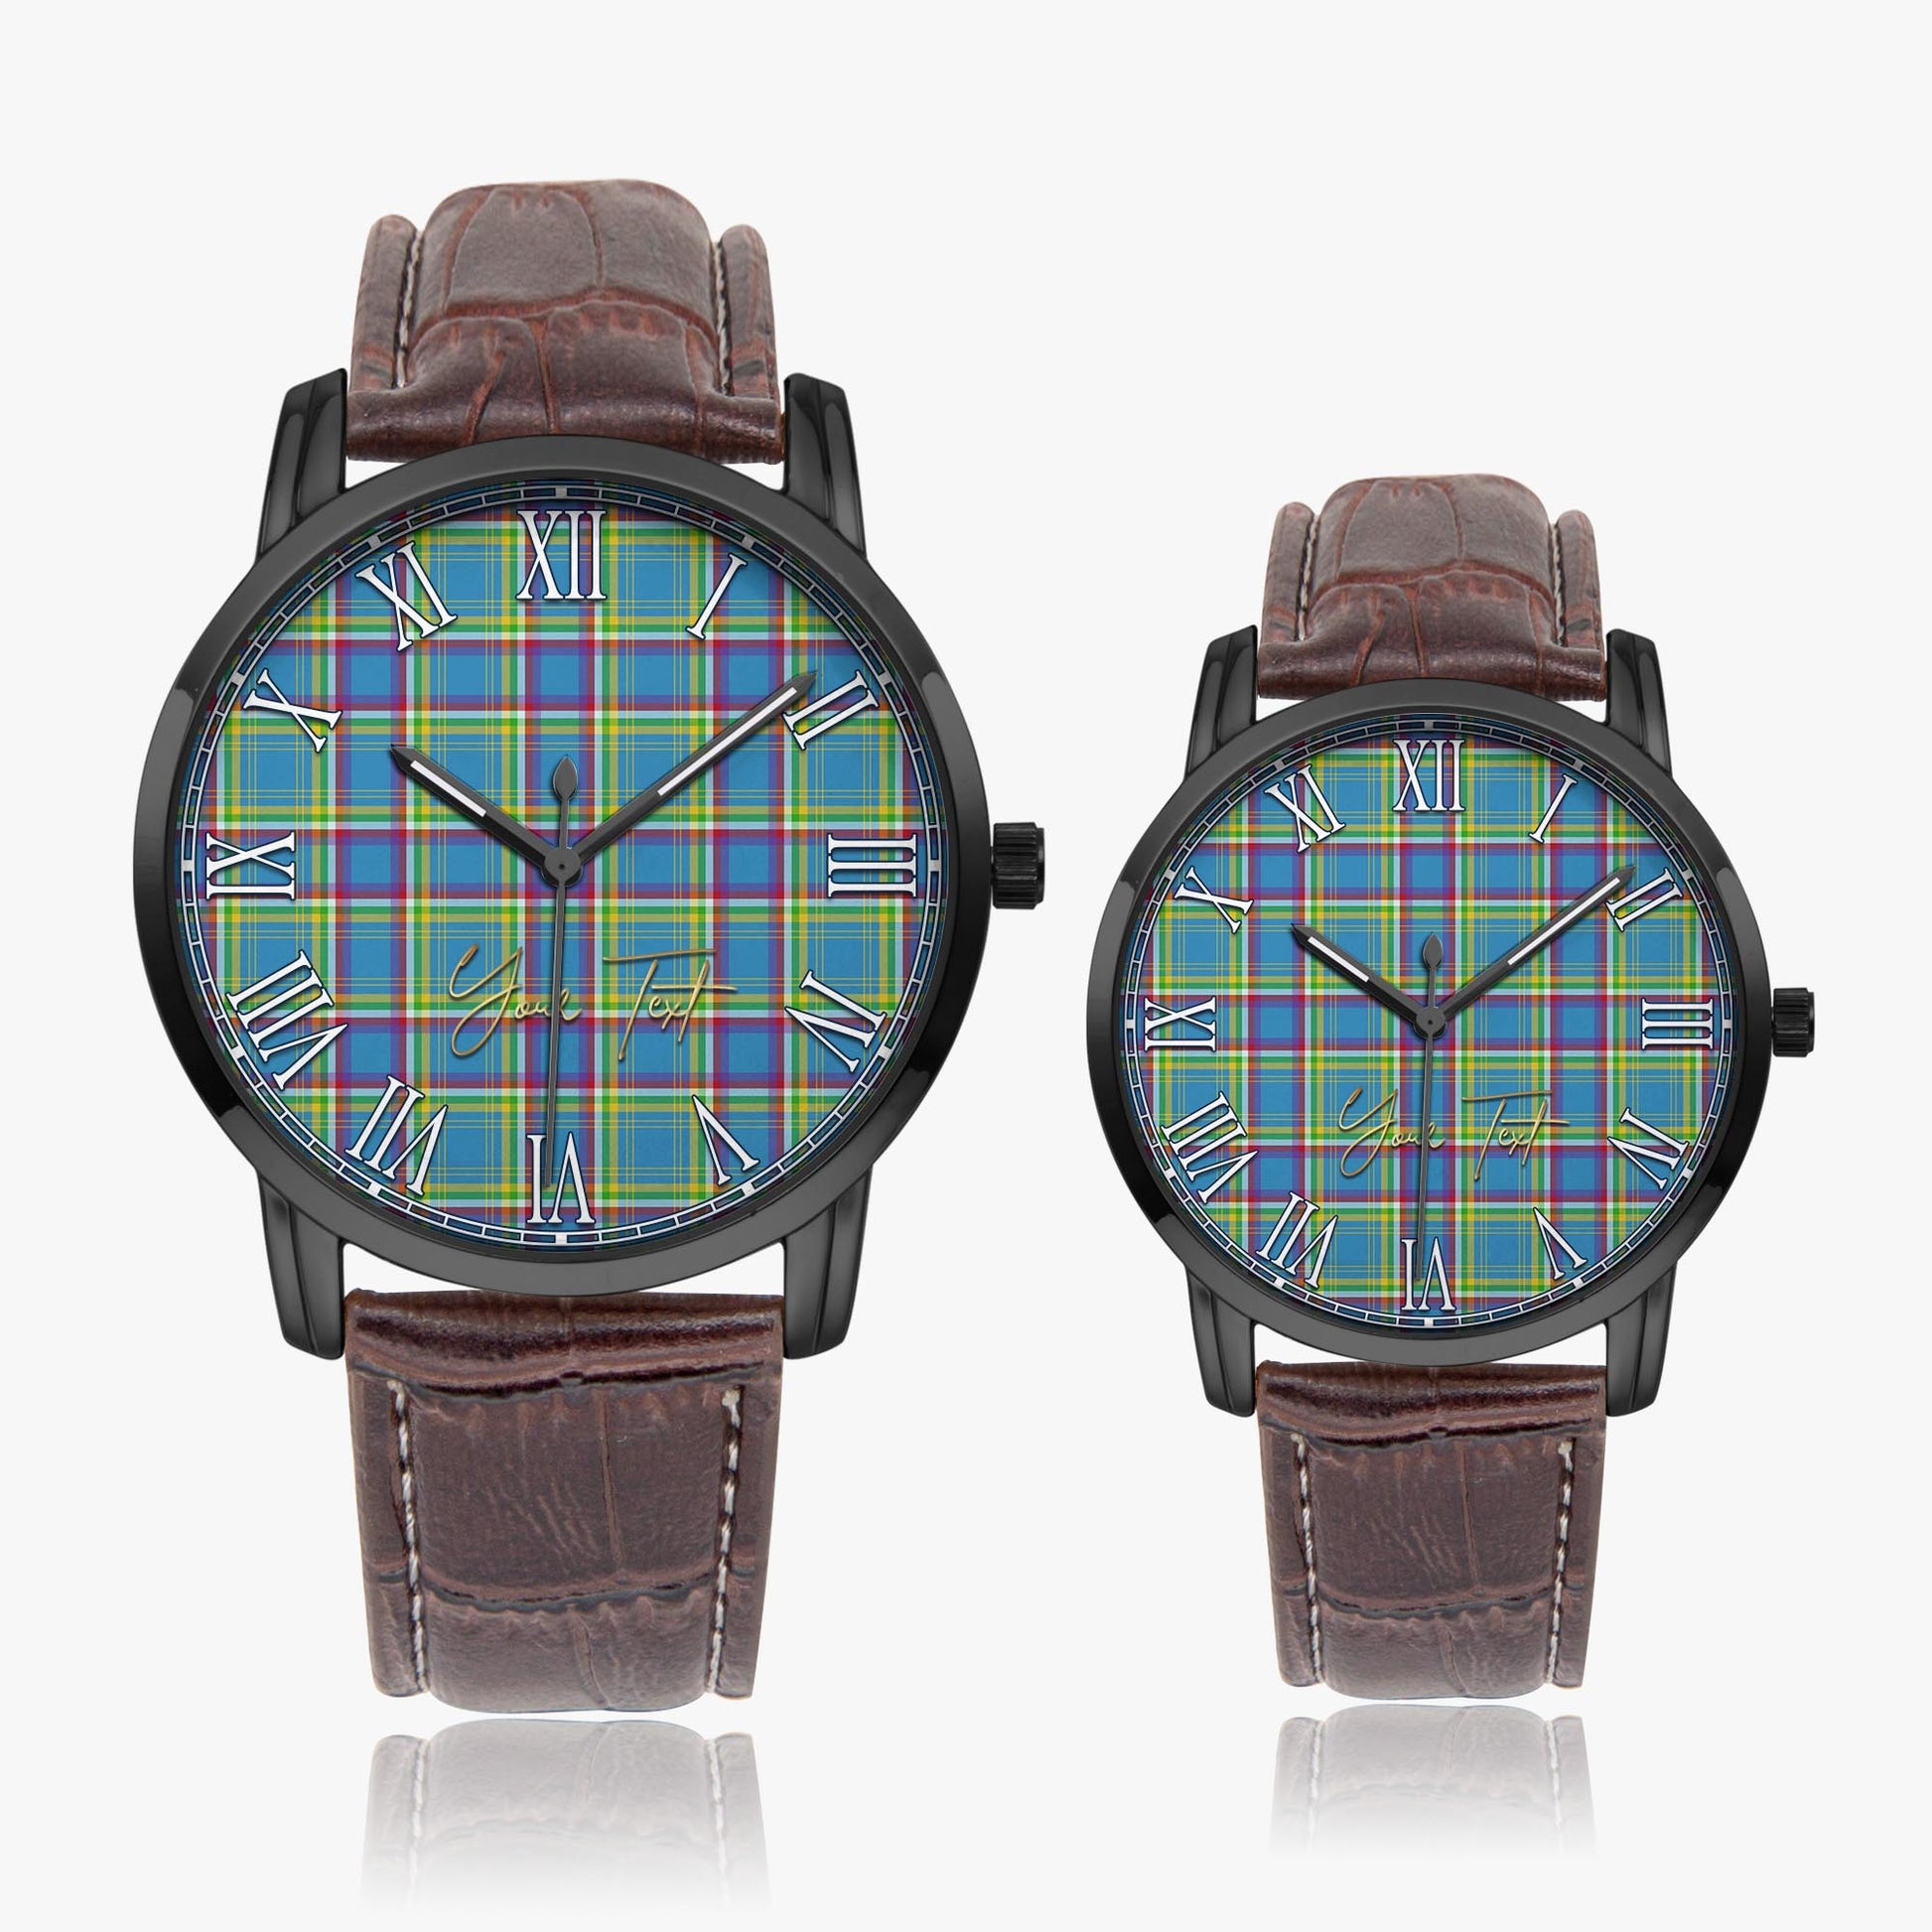 Yukon Territory Canada Tartan Personalized Your Text Leather Trap Quartz Watch Wide Type Black Case With Brown Leather Strap - Tartanvibesclothing Shop